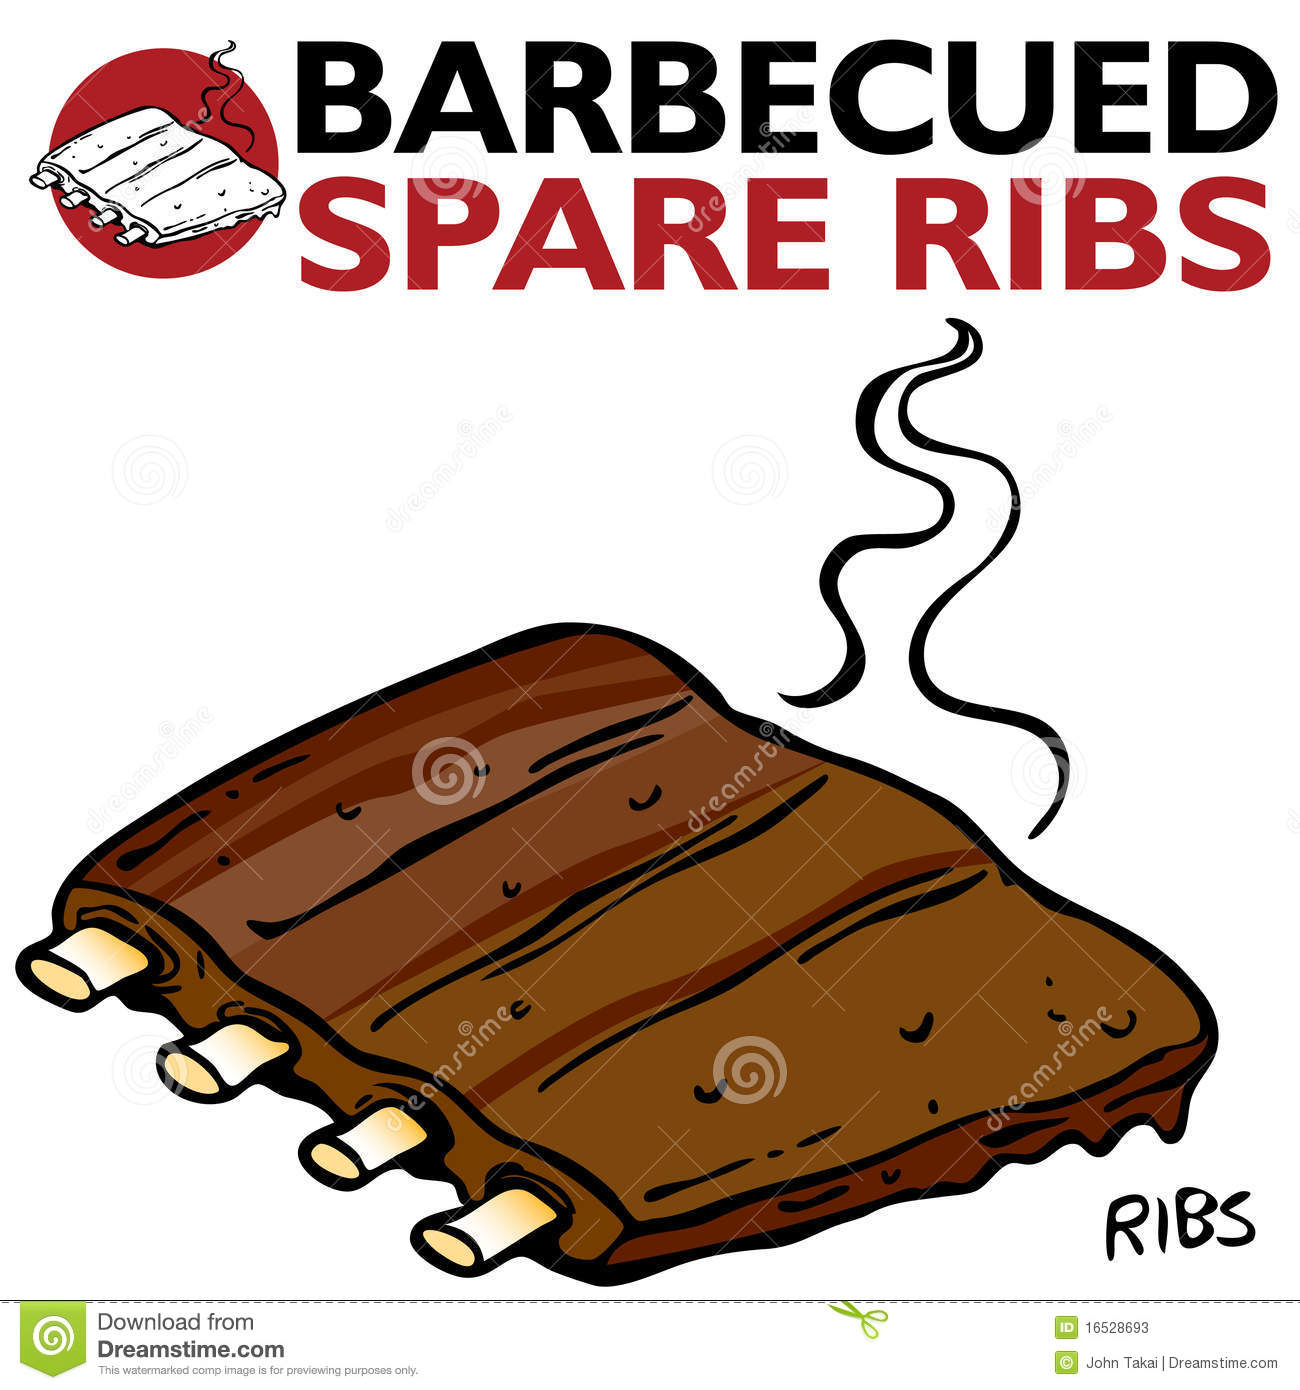 Pork Ribs Clipart Barbecued Spare Ribs Stock